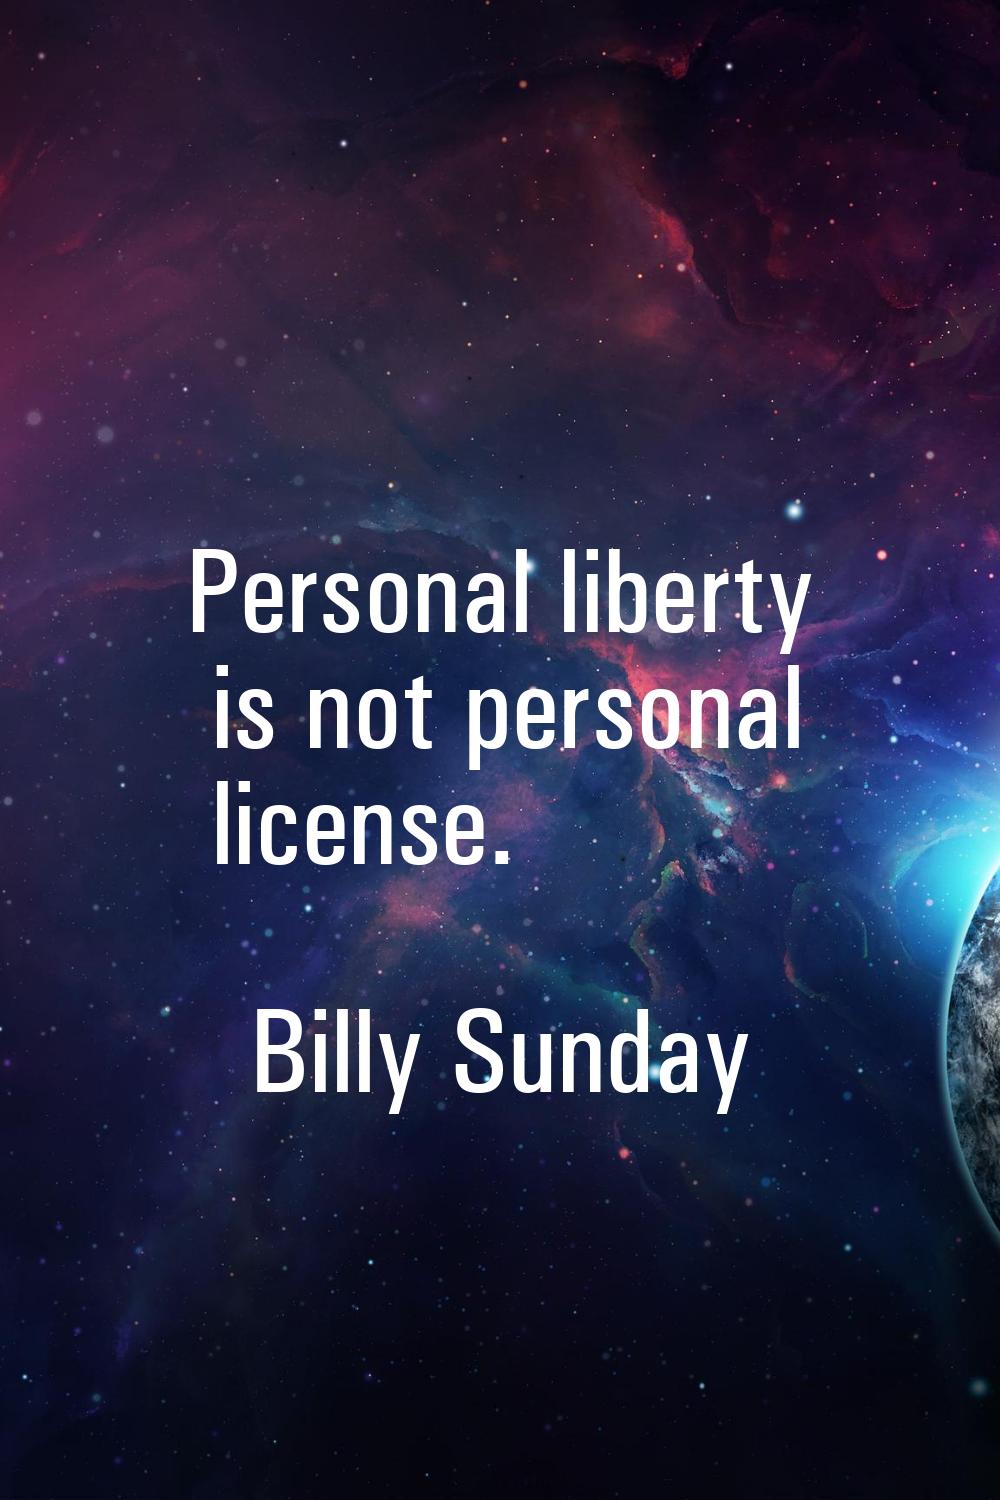 Personal liberty is not personal license.